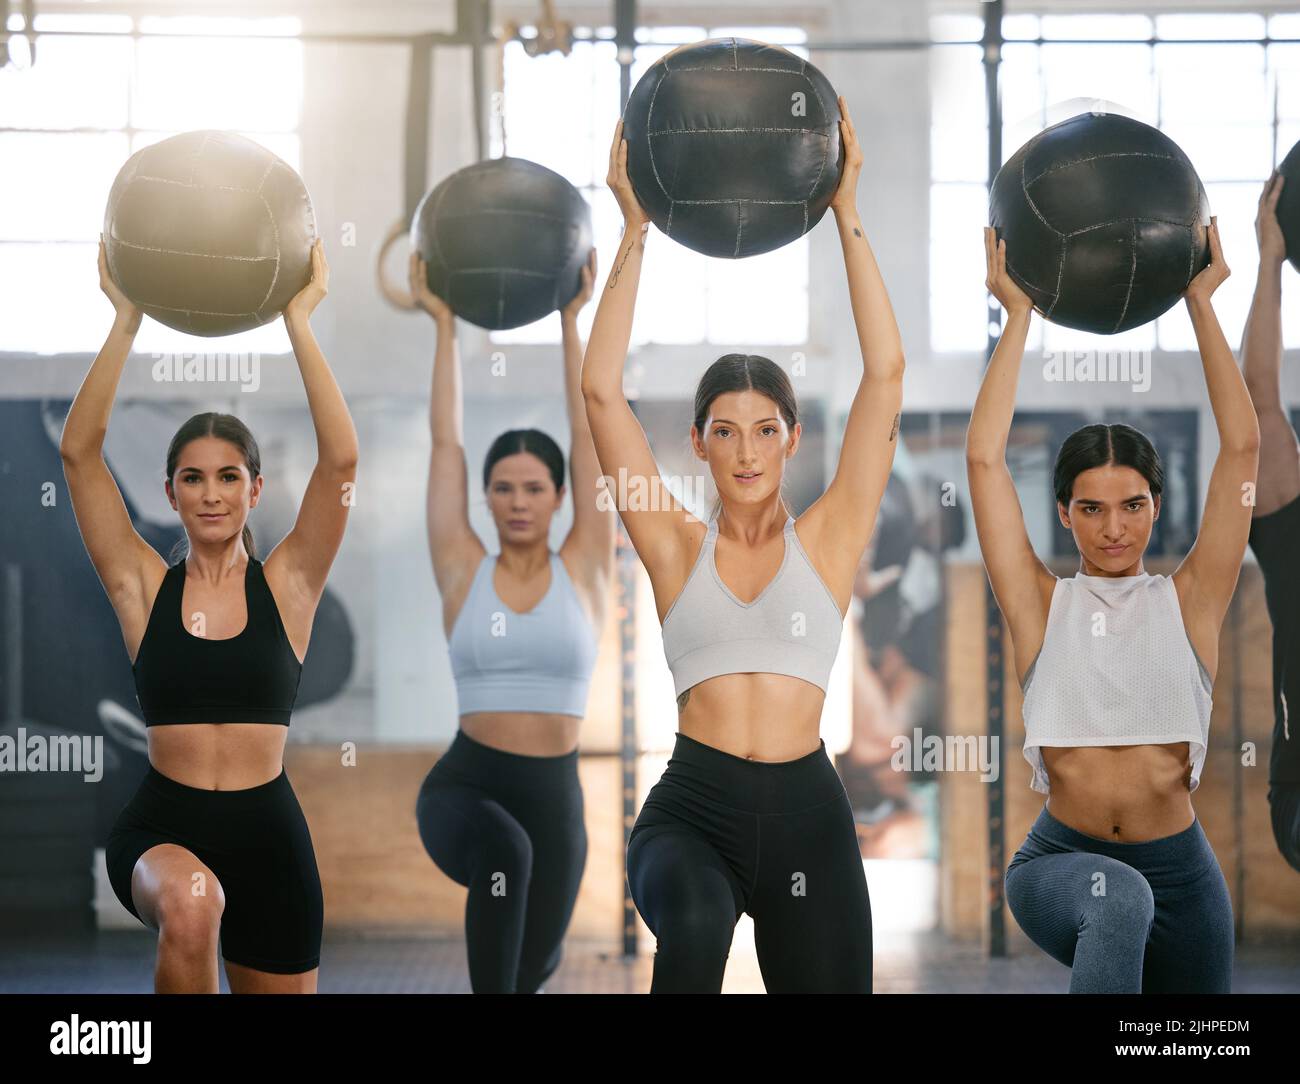 Diverse group of active young people doing overhead medicine ball lunge exercises while training together in a gym. Focused athletes challenging Stock Photo